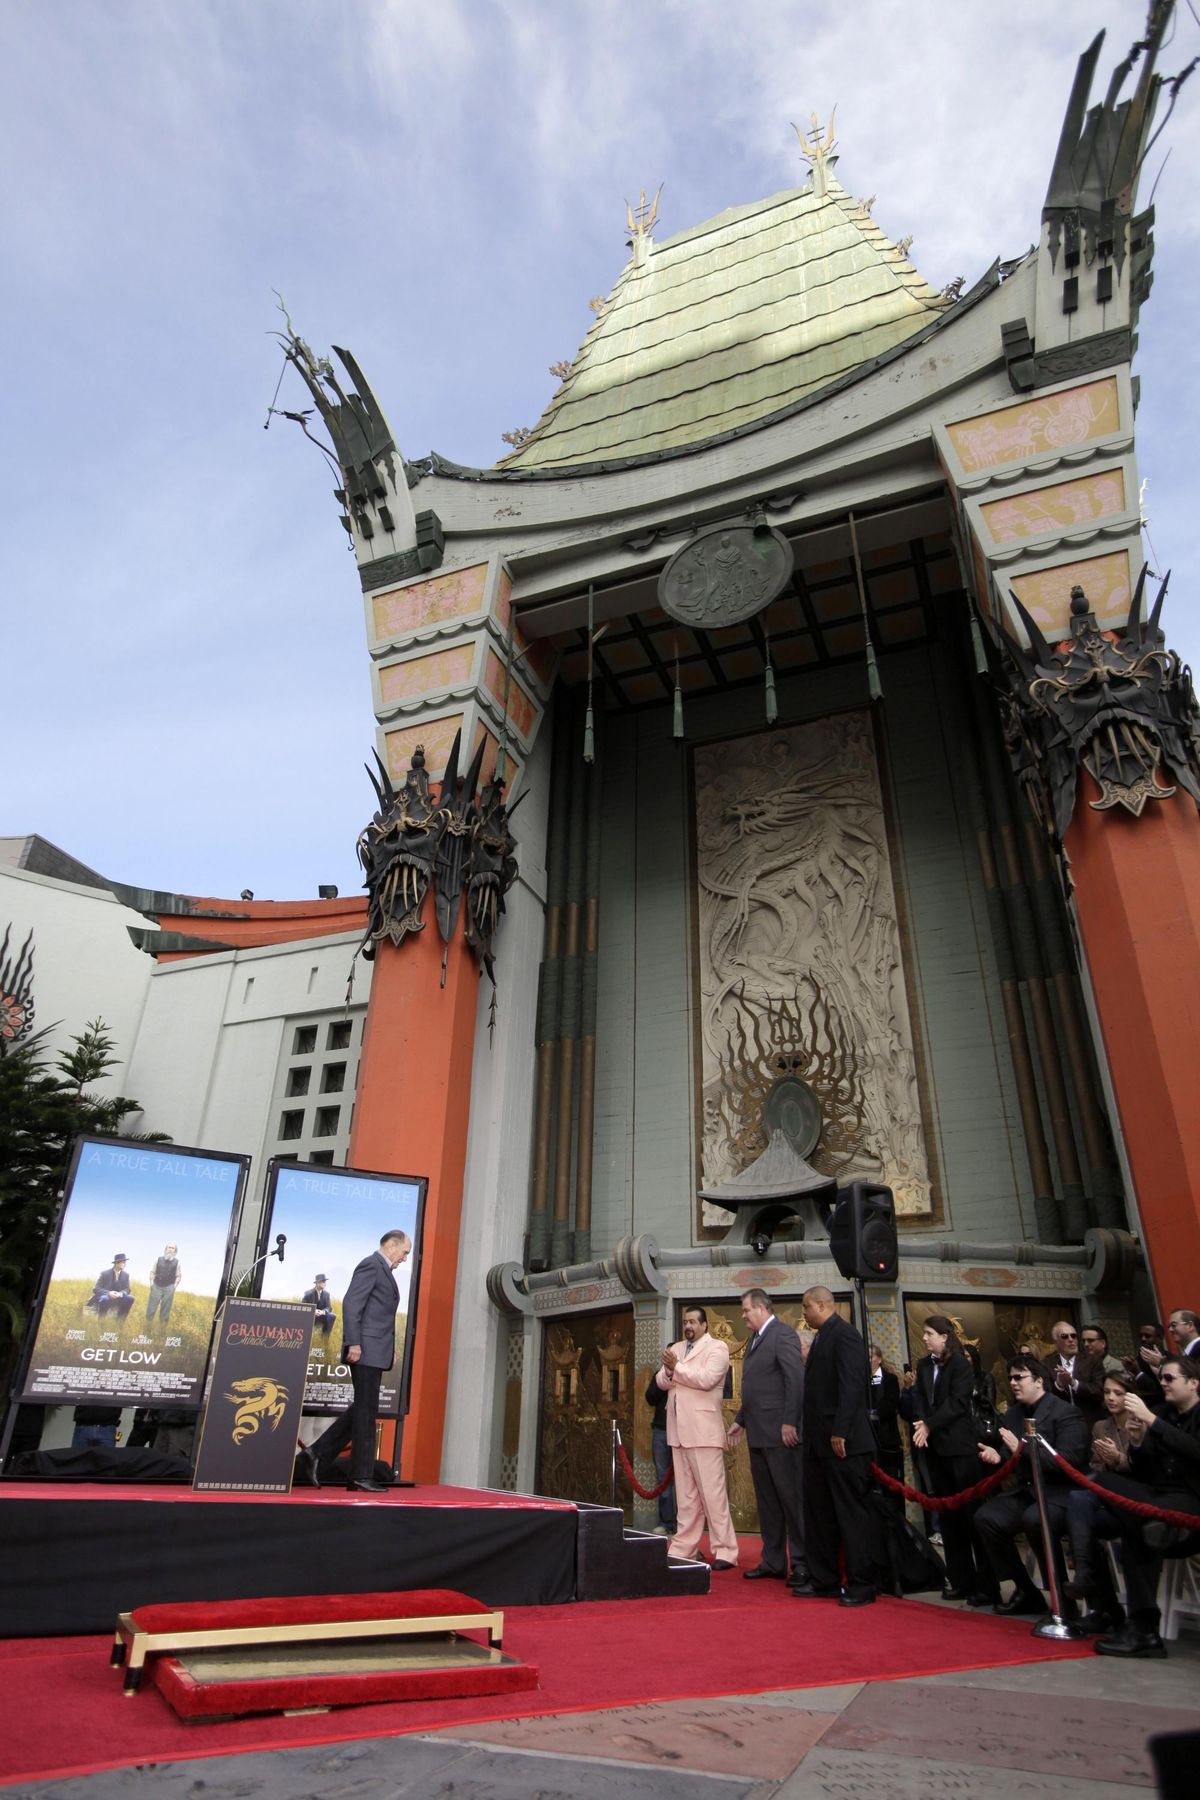 Oscar-winning actor Robert Duvall appears at a ceremony in front of Grauman’s Chinese Theater in Los Angeles on Jan. 5, 2011, marking both his 80th birthday and his 50 years in the film business. (Damian Dovarganes / AP)